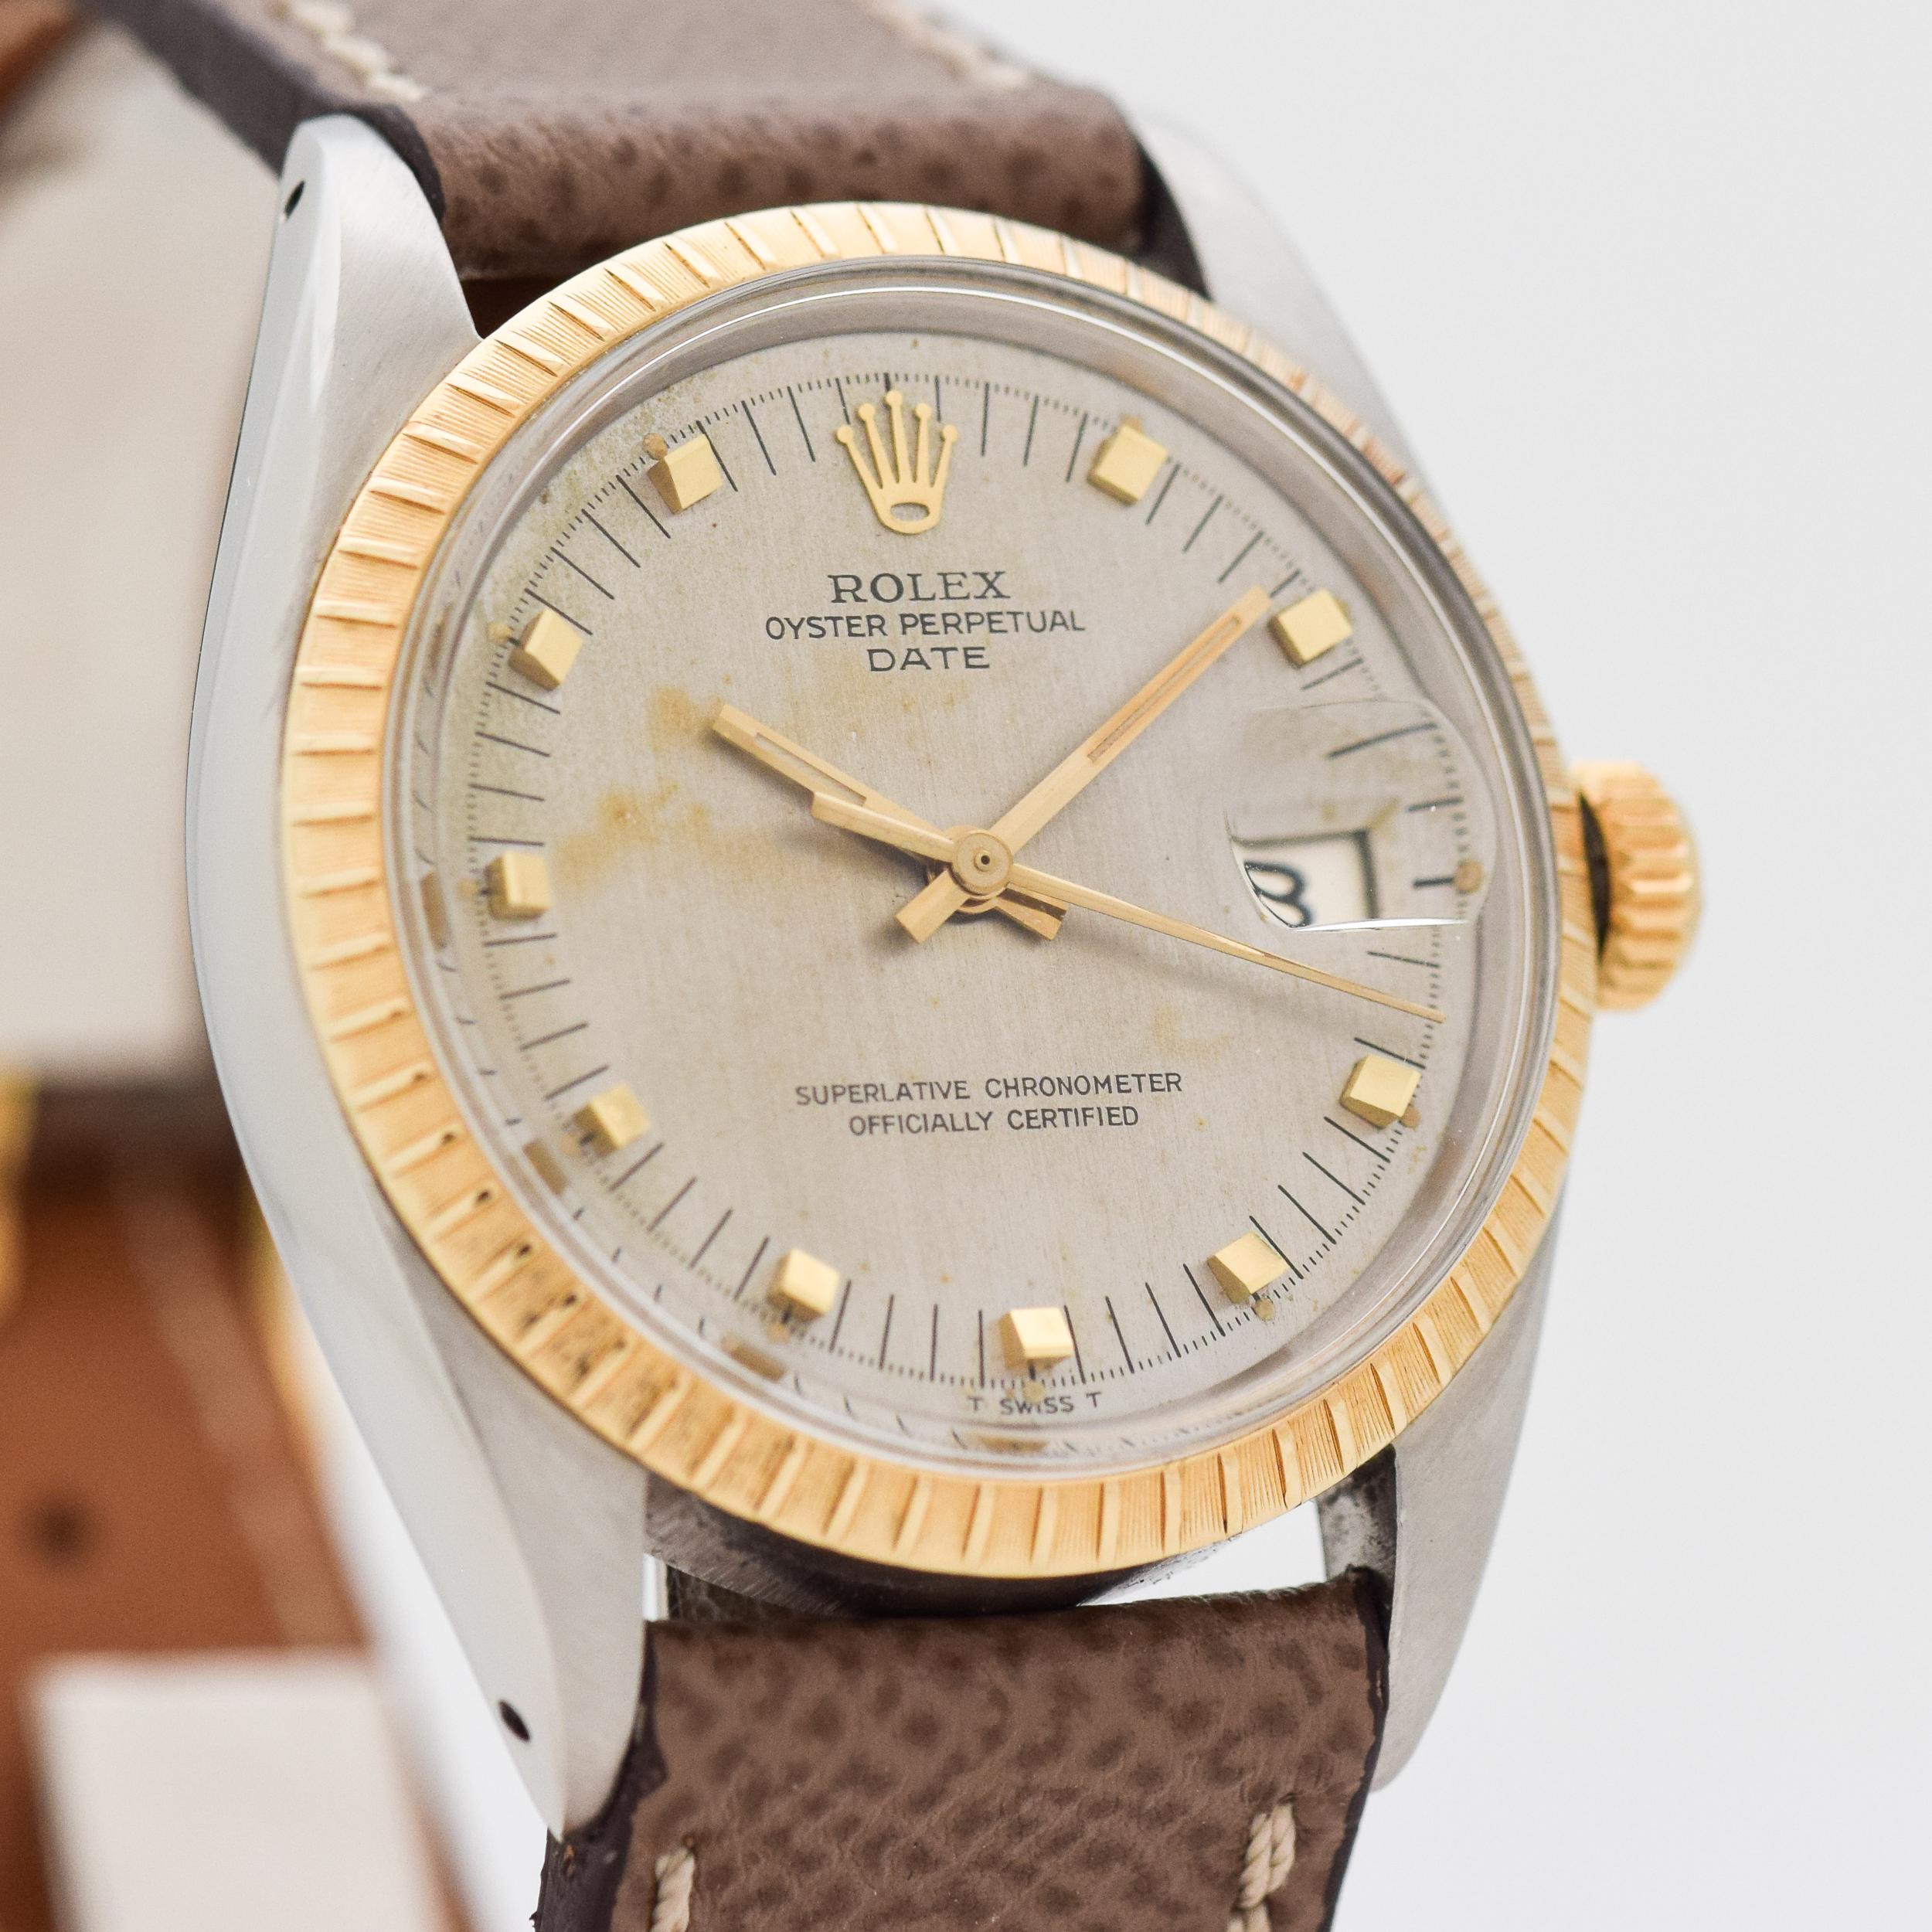 1968 Vintage Rolex Date Automatic Ref. 1505 Two Tone 14k Yellow Gold Fluted Bezel and Stainless Steel watch with Original Unusual Silver Dial with Applied Gold Color Unique Square Markers. 35mm x 41mm lug to lug (1.38 in. x 1.61 in.) 26 jewels,